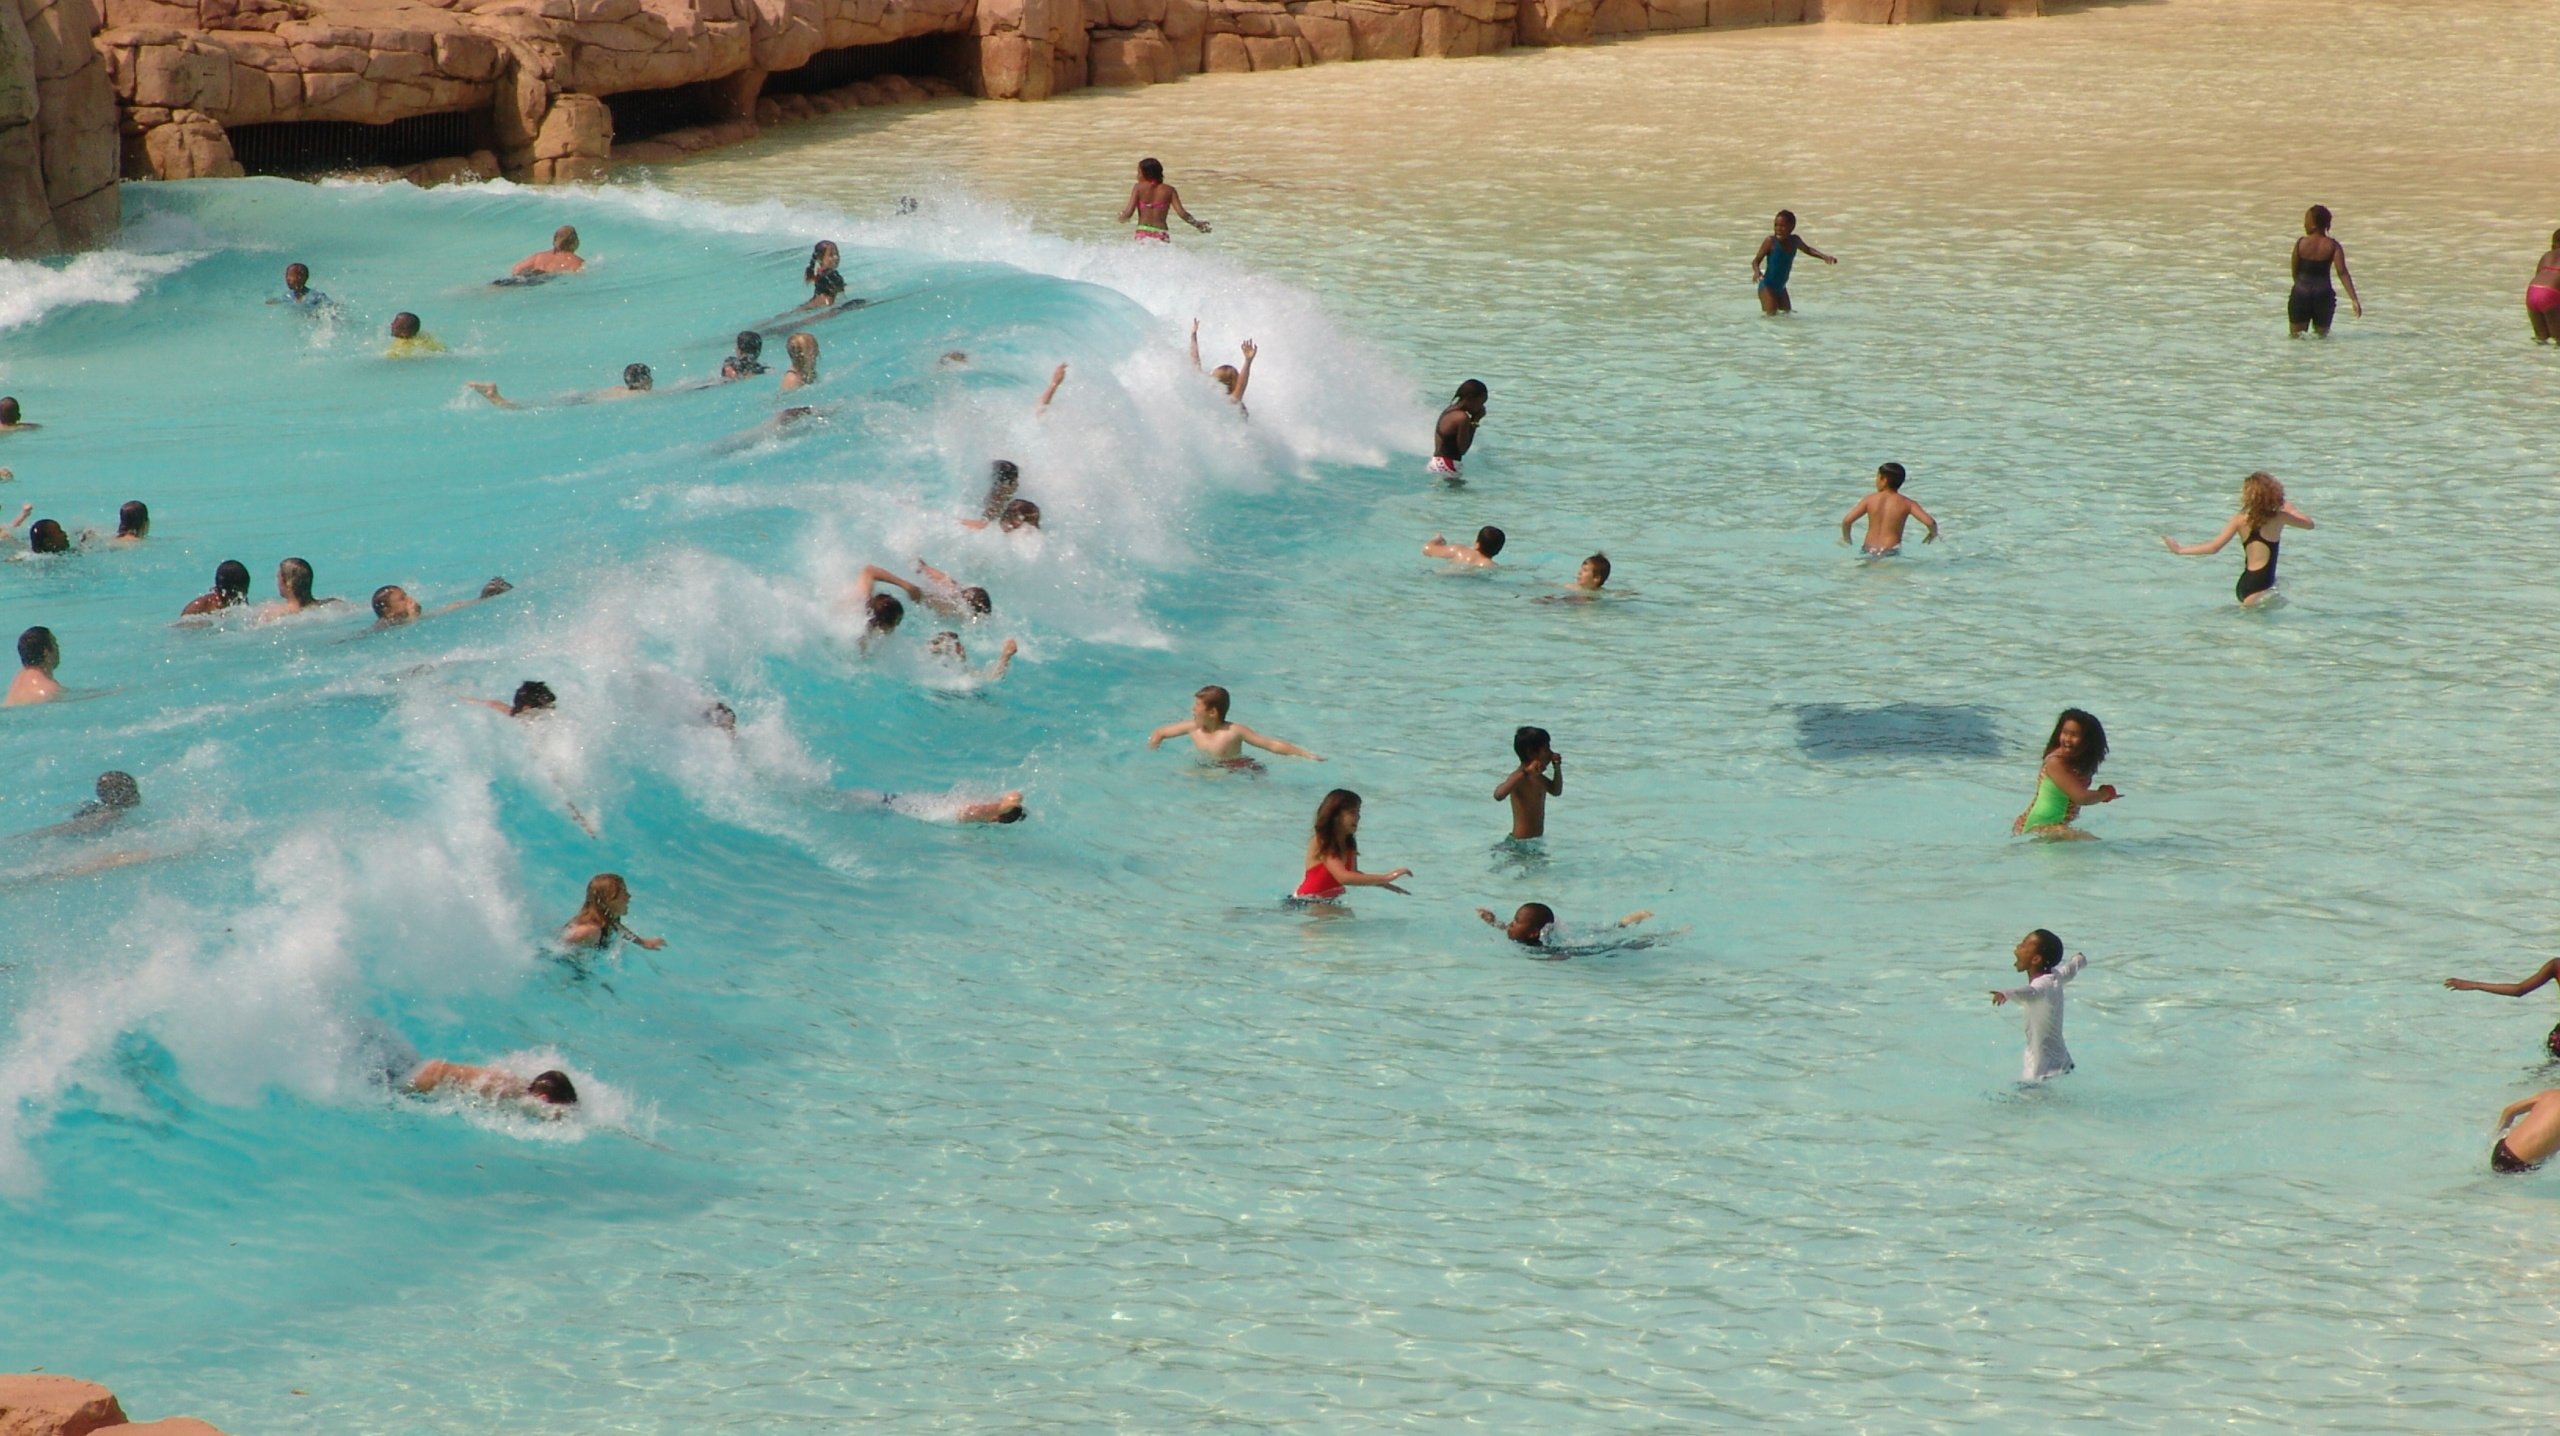 Surf Wave Pool, Sun City Valley of the Waves, South Africa